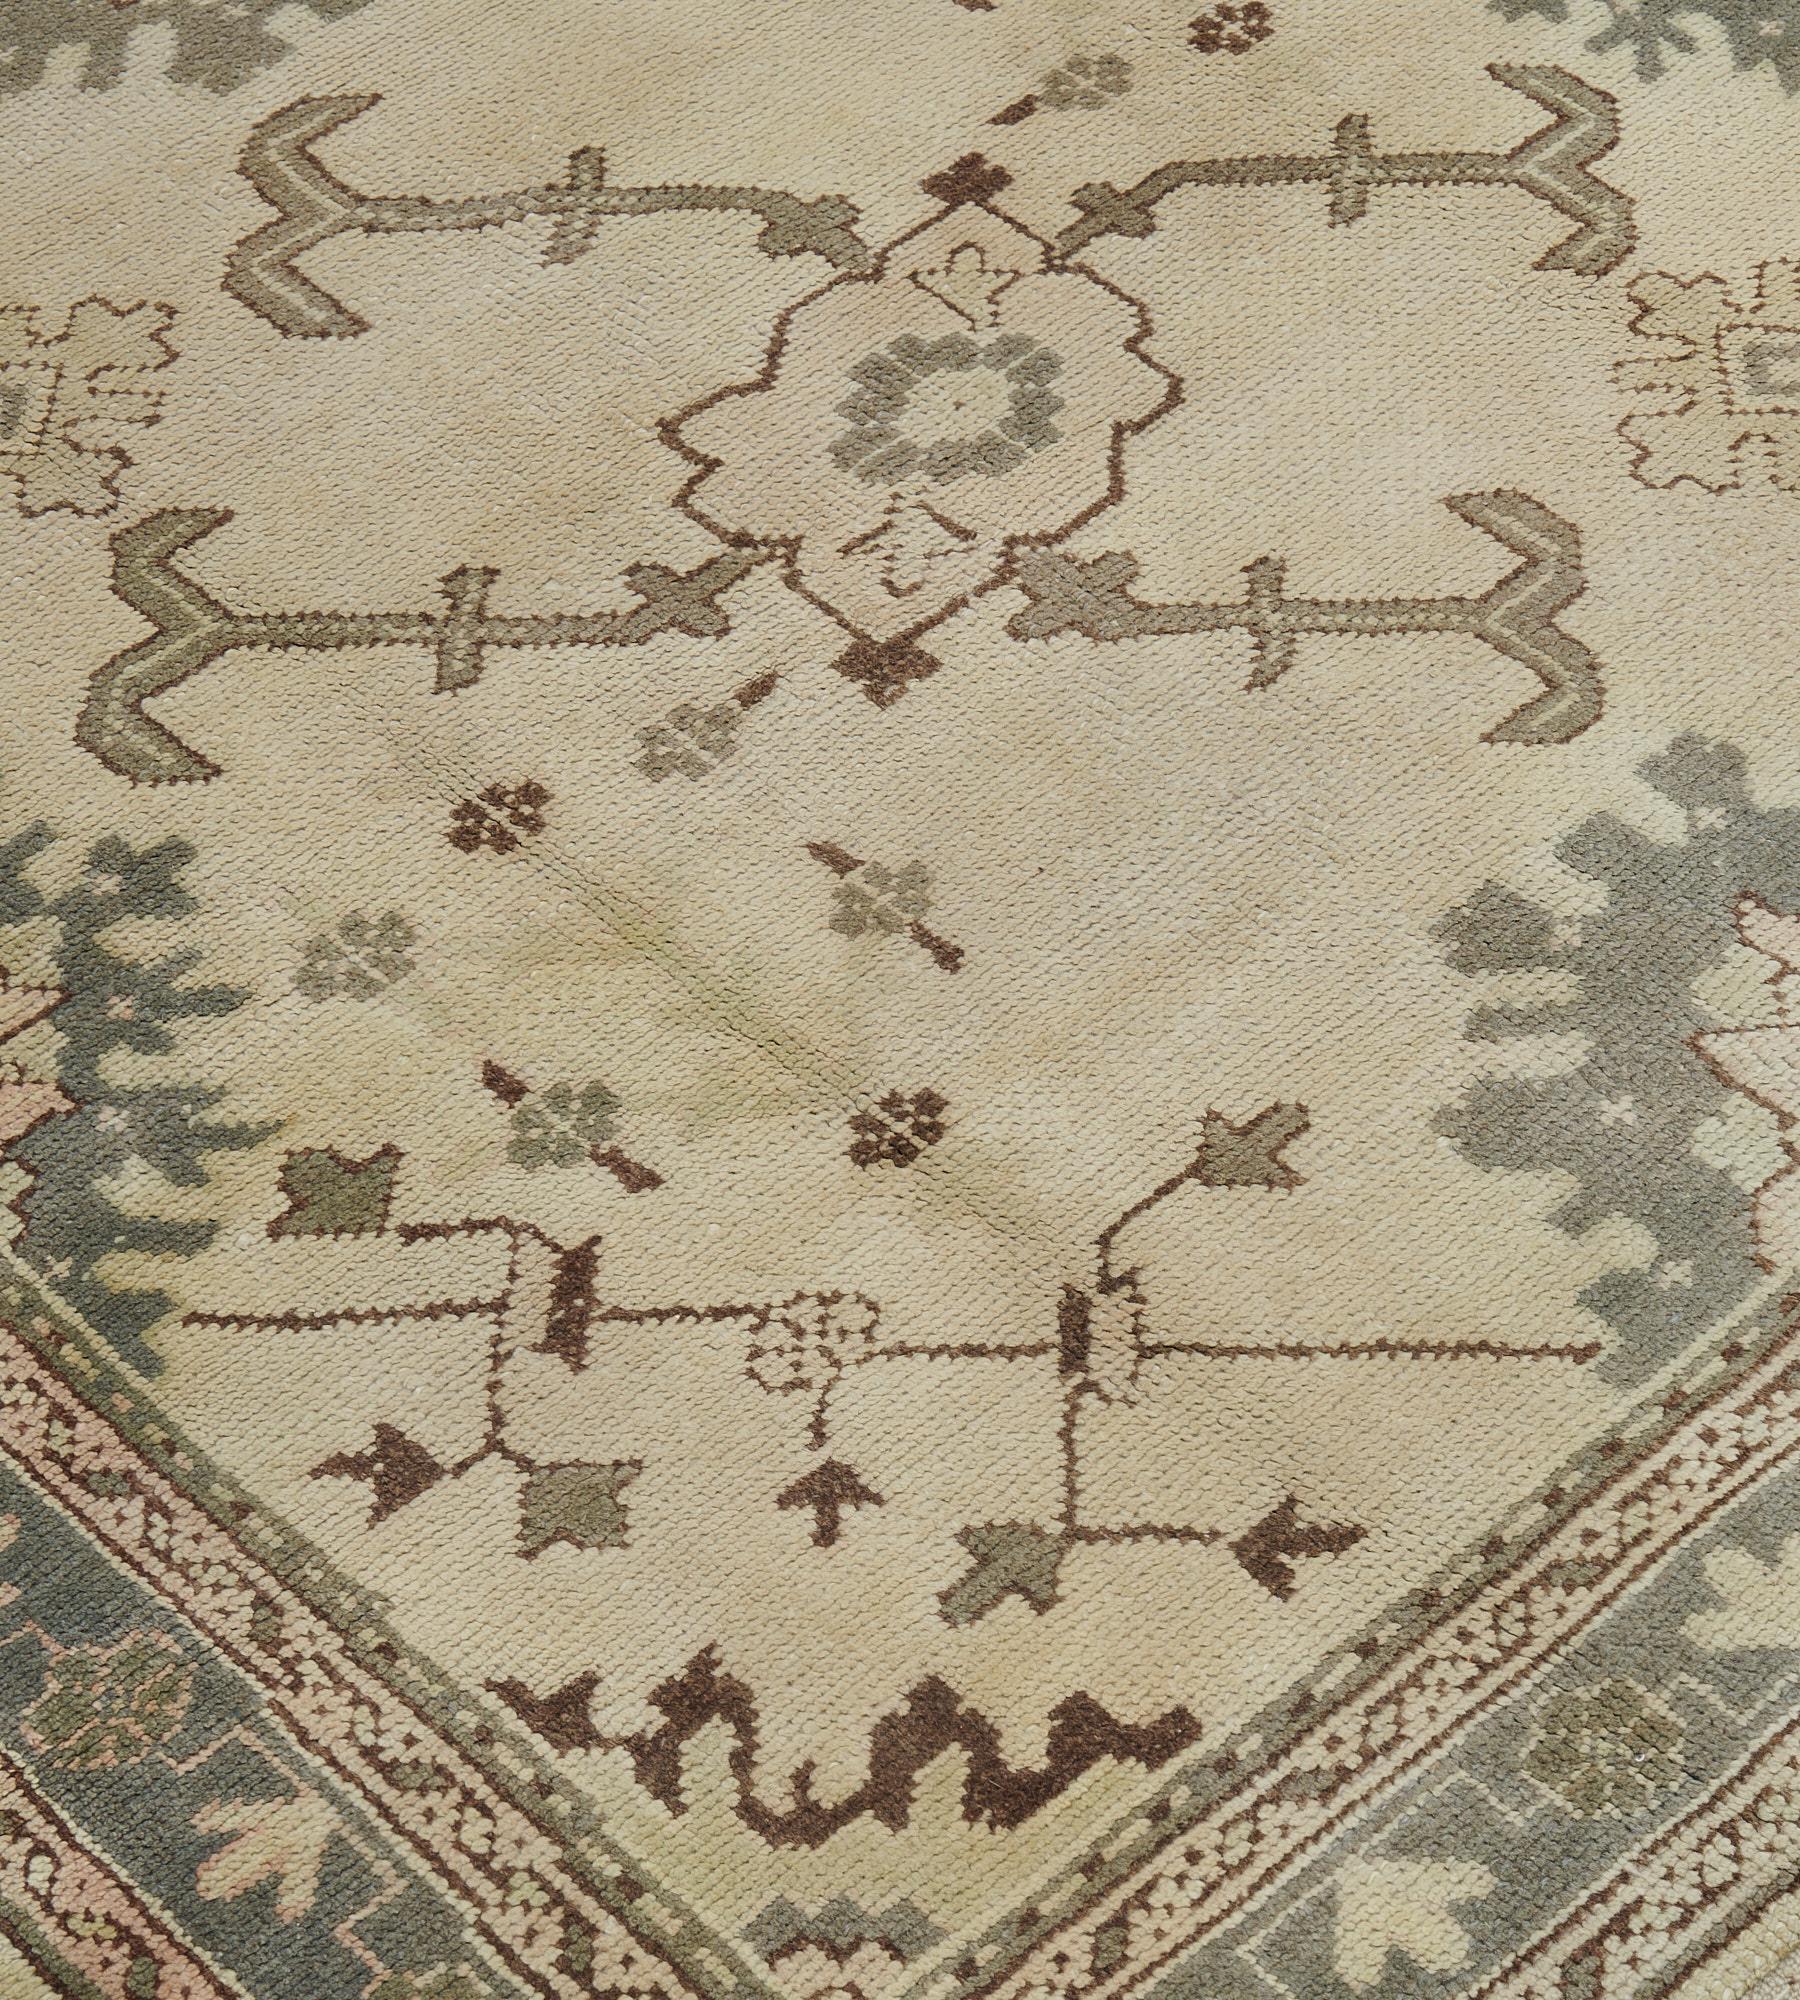 This antique, circa 1900, Oushak rug has a shaded ivory field with a central stepped lozenge medallion containing a flowerhead issuing soft-grey hooked stems surrounded by a variety of flowerheads and further cusped palmettes, a large light grey